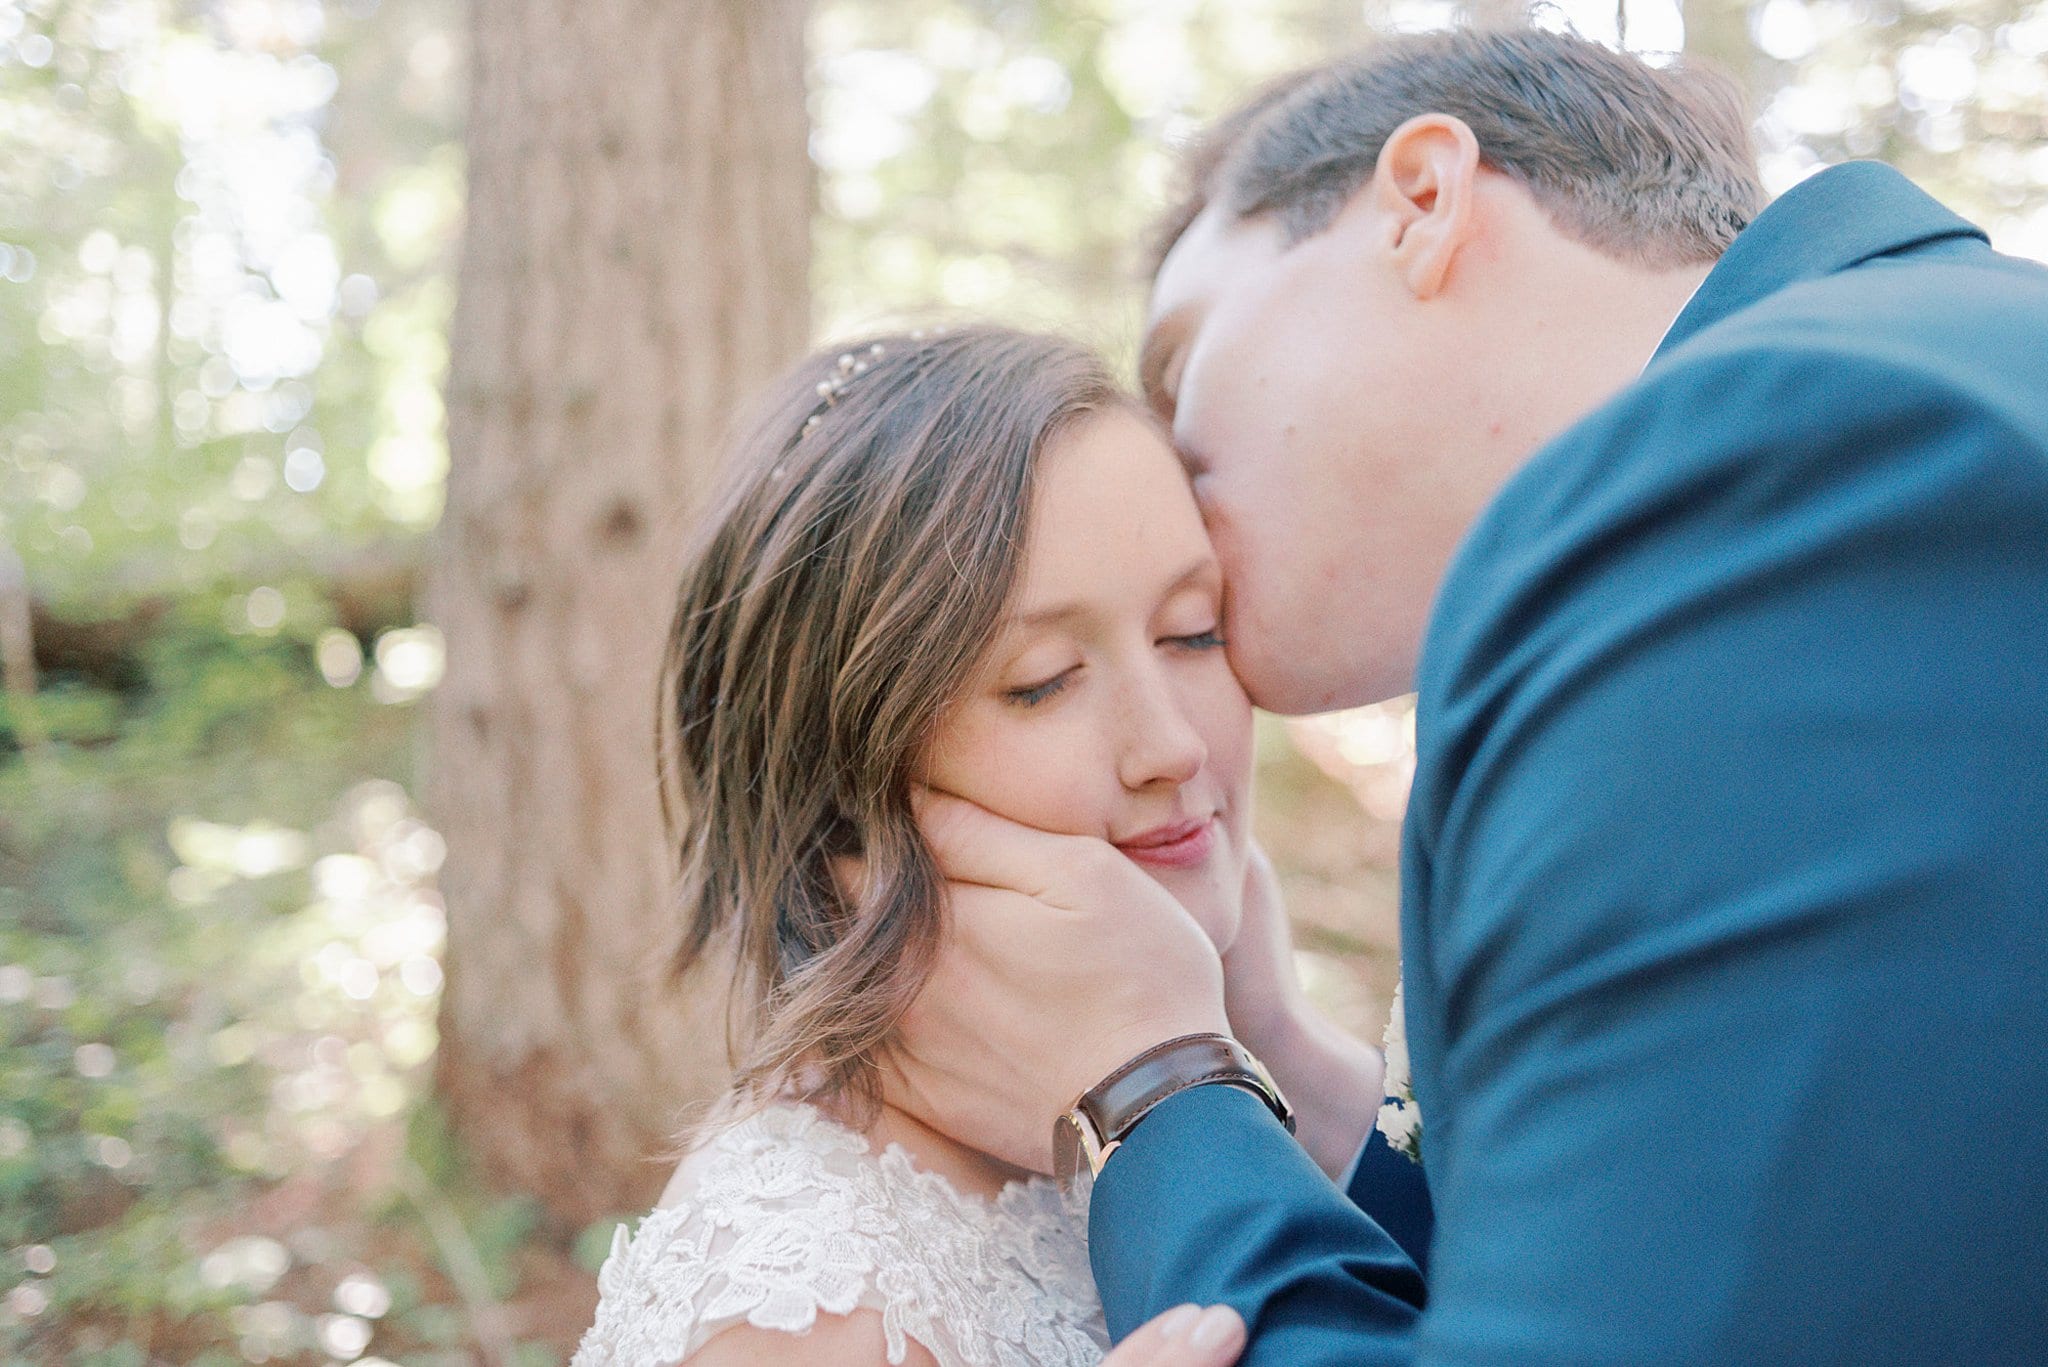 A groom in a blue suit kisses the temple of his bride with hands on her face at a Treehouse Point Wedding